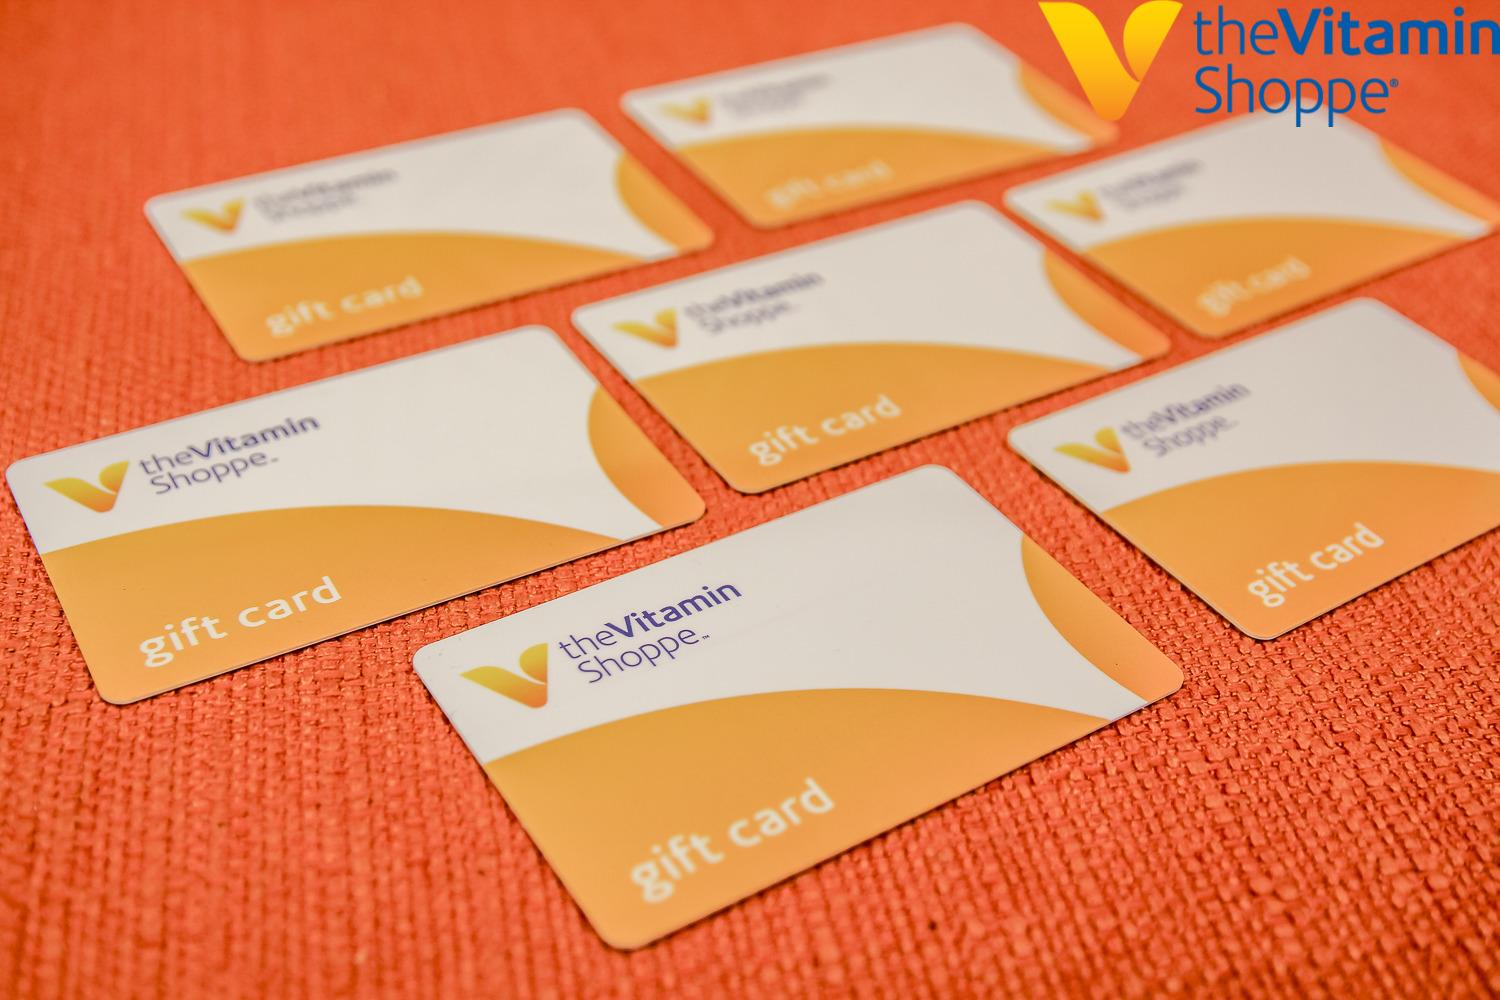 How To Buy, Redeem And Check The Balance On Vitamin Shoppe Gift Cards